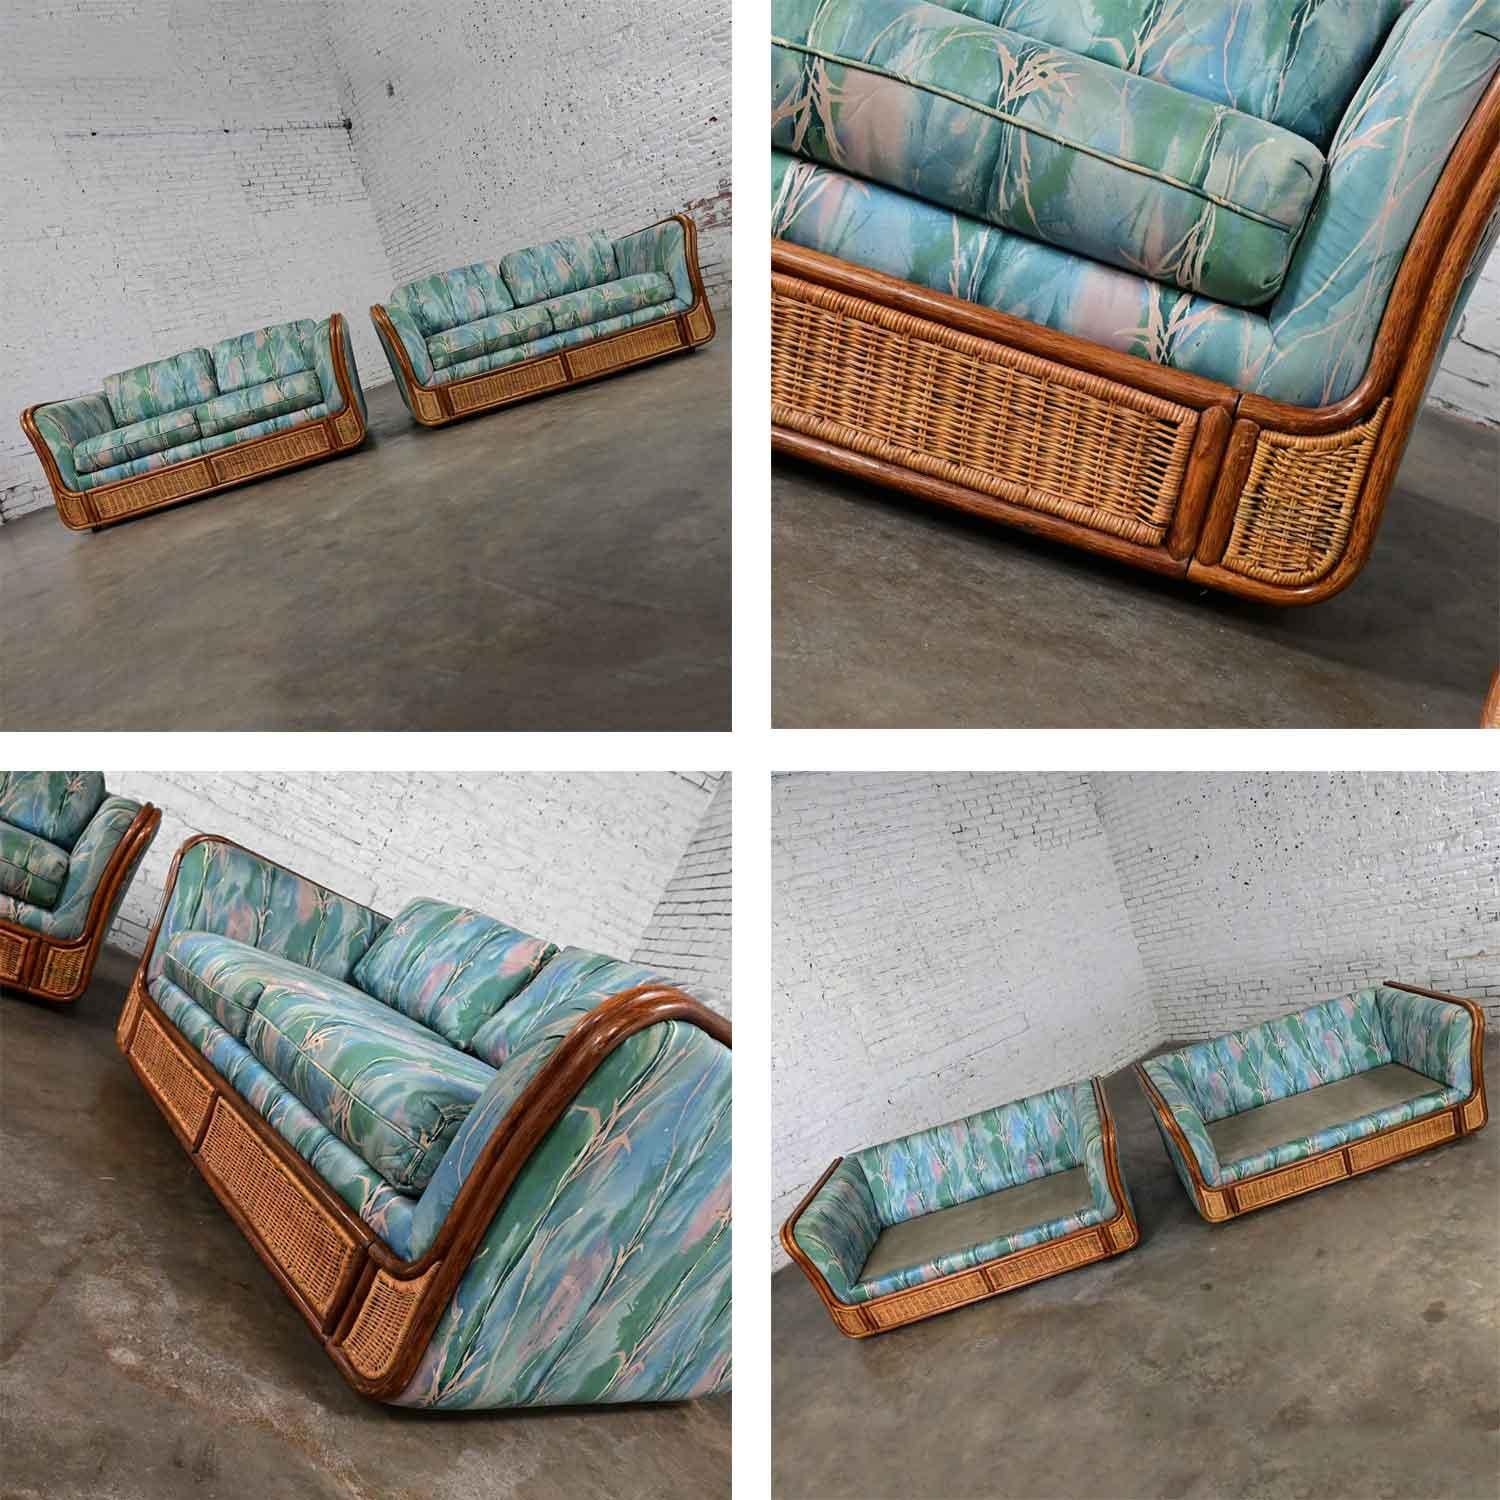 Late 20th Century Boho Chic Rattan & Wicker Tuxedo Style Upholstered Loveseats For Sale 5